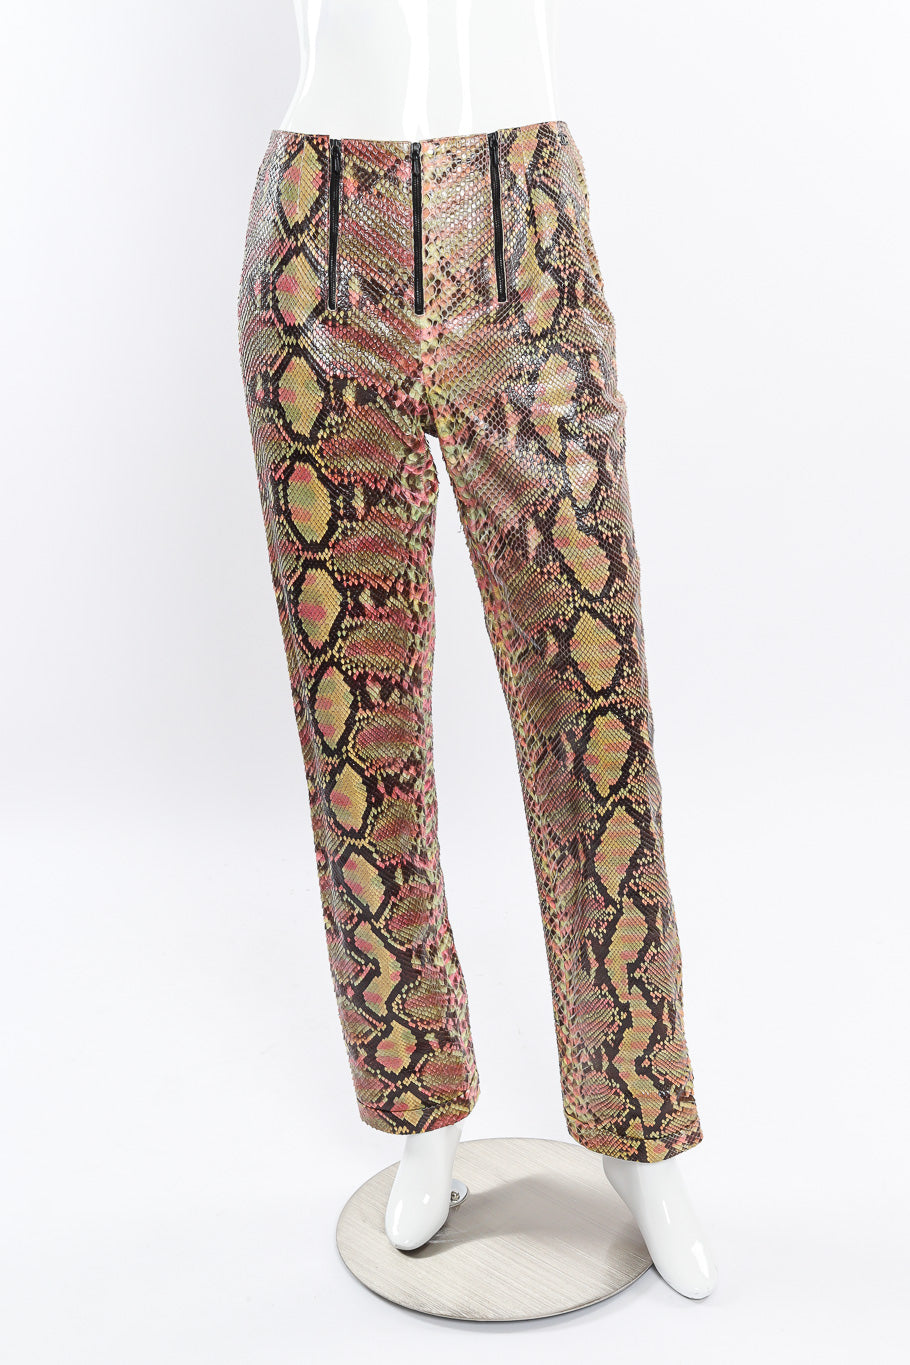 Python zip front pants by Chanel on mannequin @recessla